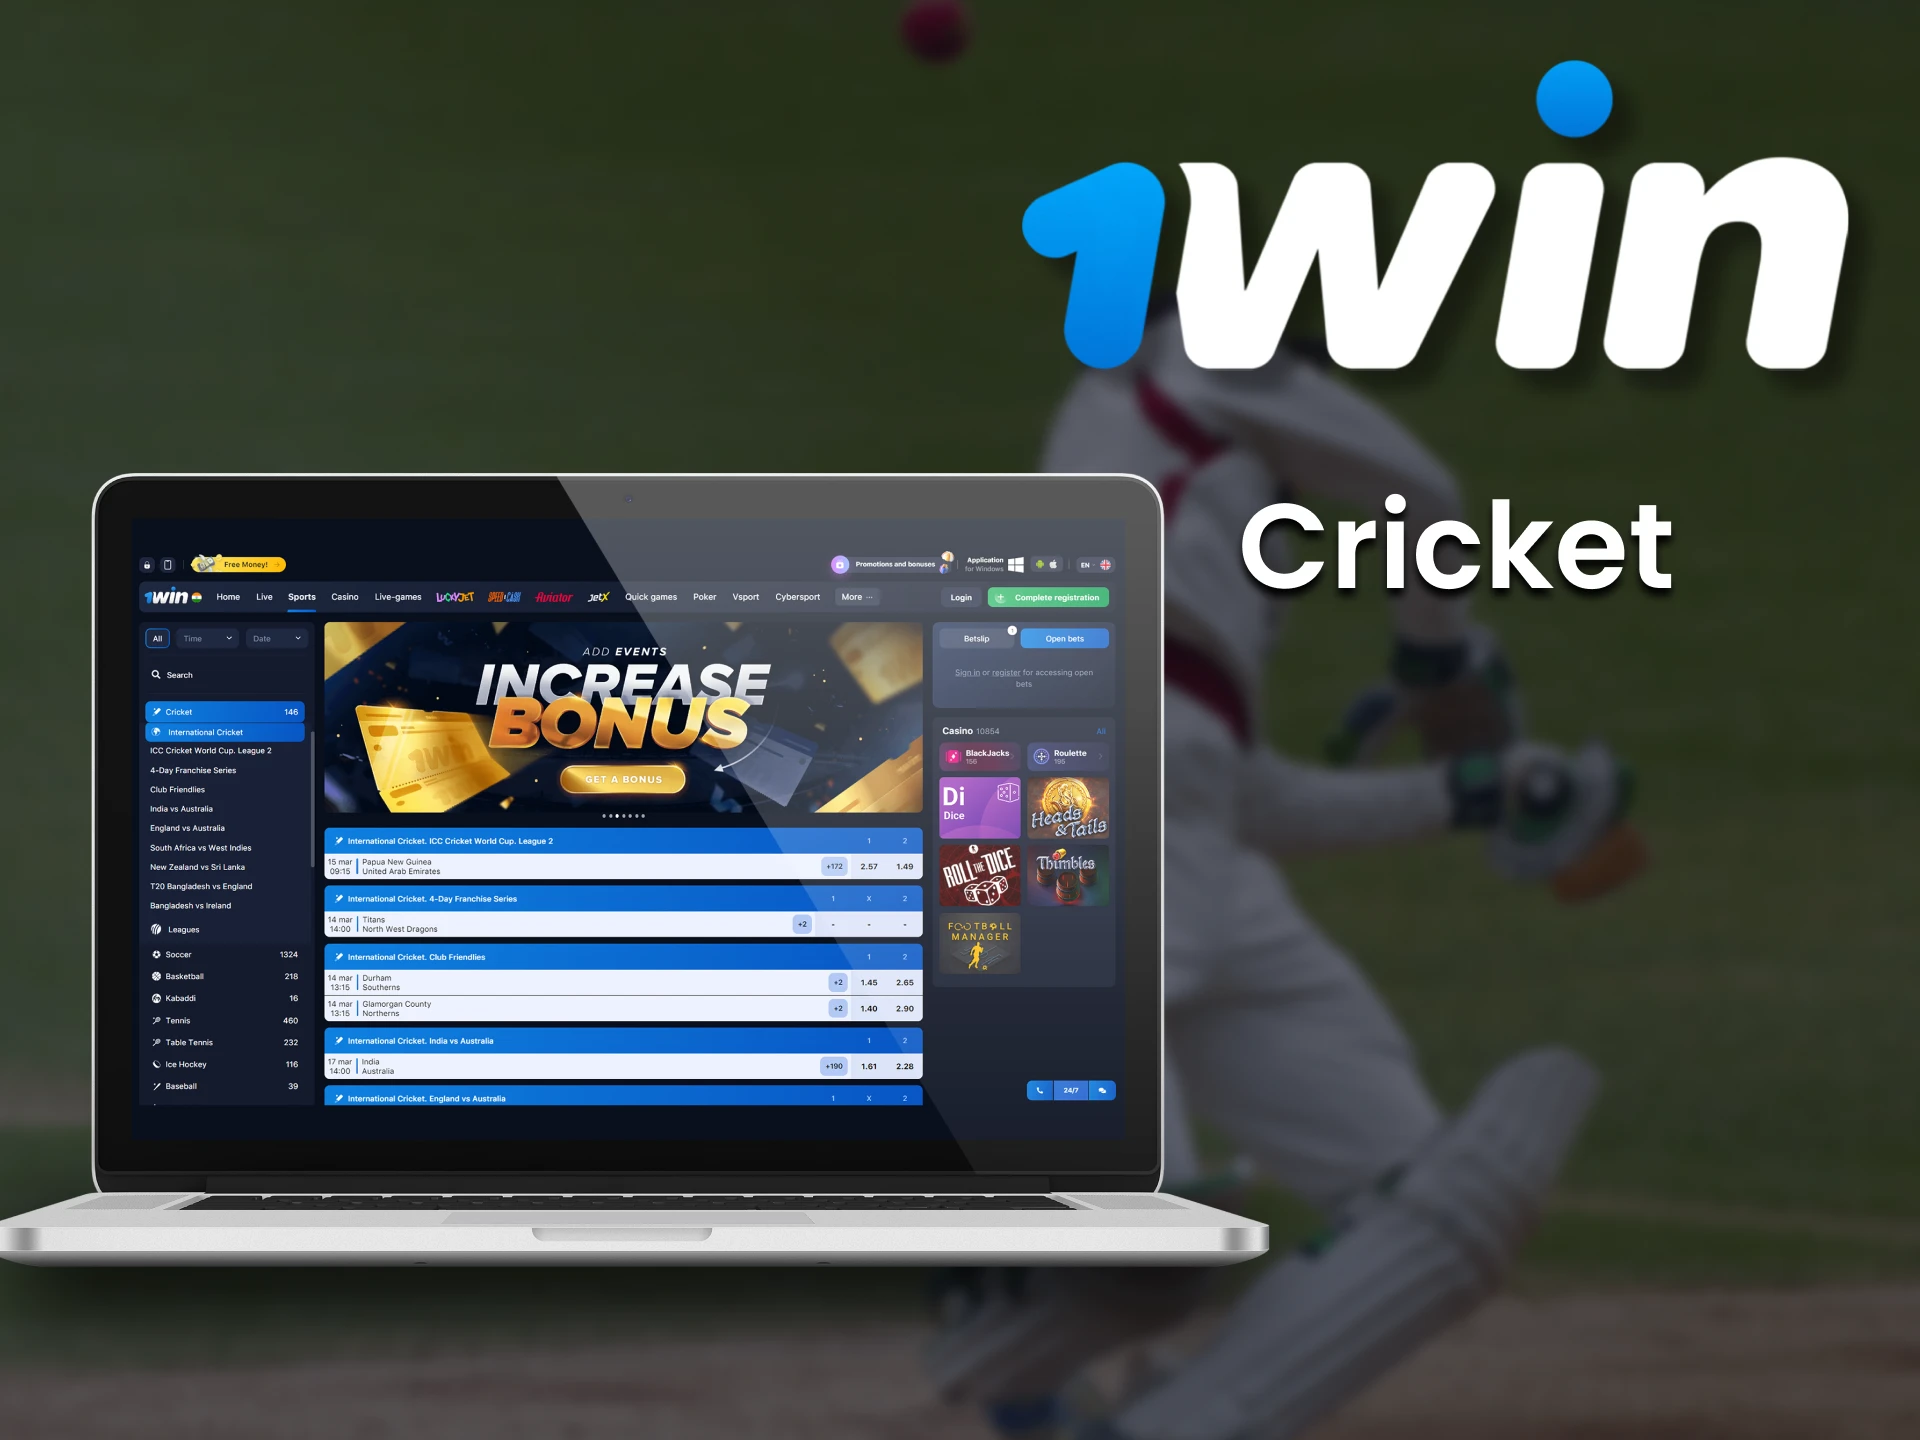 Place your cricket bets with 1win.